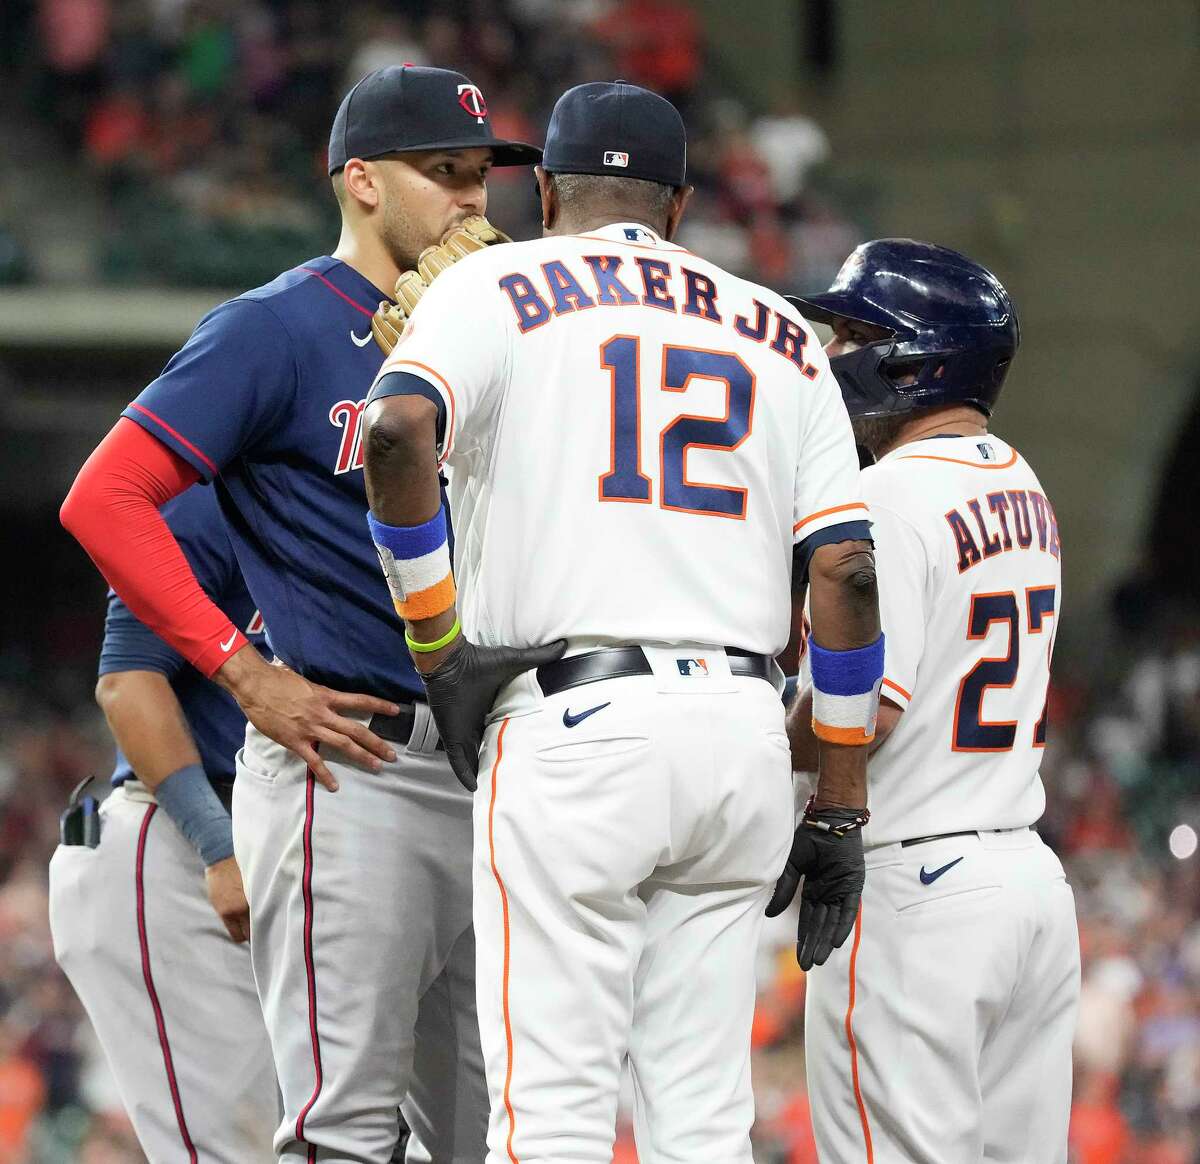 Minnesota Twins shortstop Carlos Correa (4) approaches Houston Astros Jose Altuve (27) after he was hit by a pitch from Minnesota Twins starting pitcher Aaron Sanchez during the fifth inning of an MLB baseball game at Minute Maid Park on Tuesday, Aug. 23, 2022 in Houston.